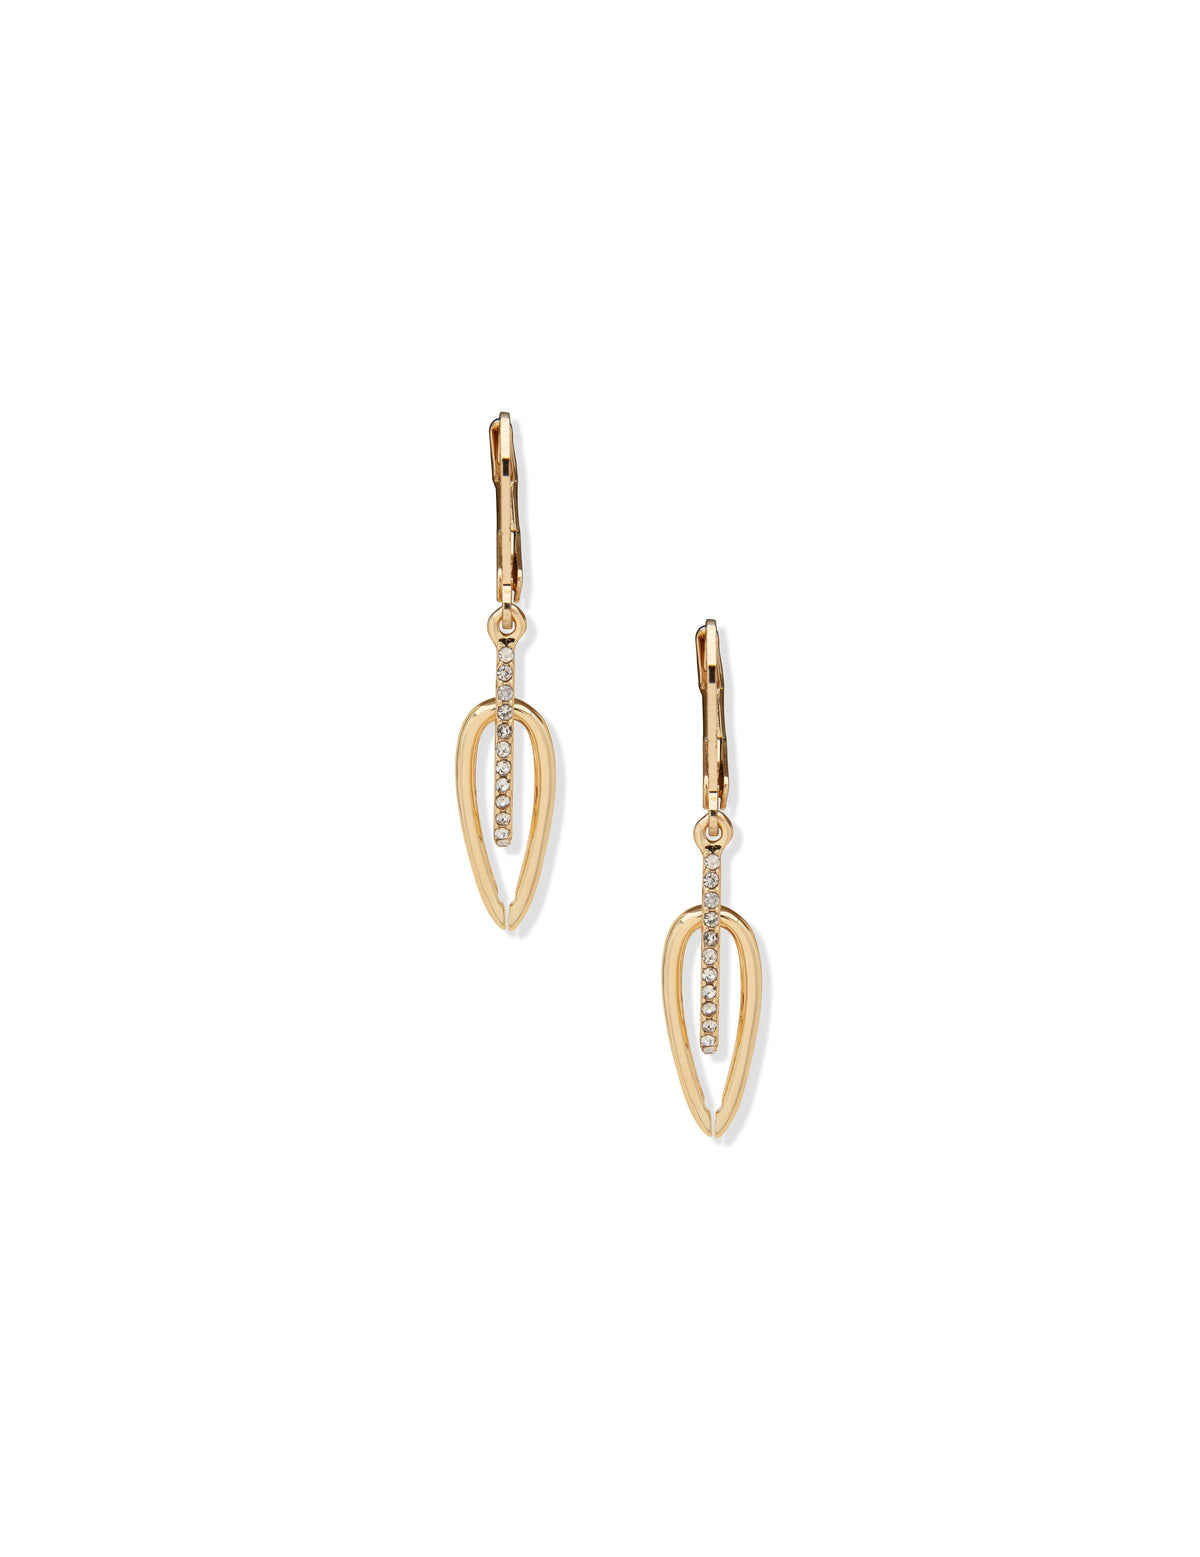 Anne Klein Gold-Tone Drop Earrings with Pave